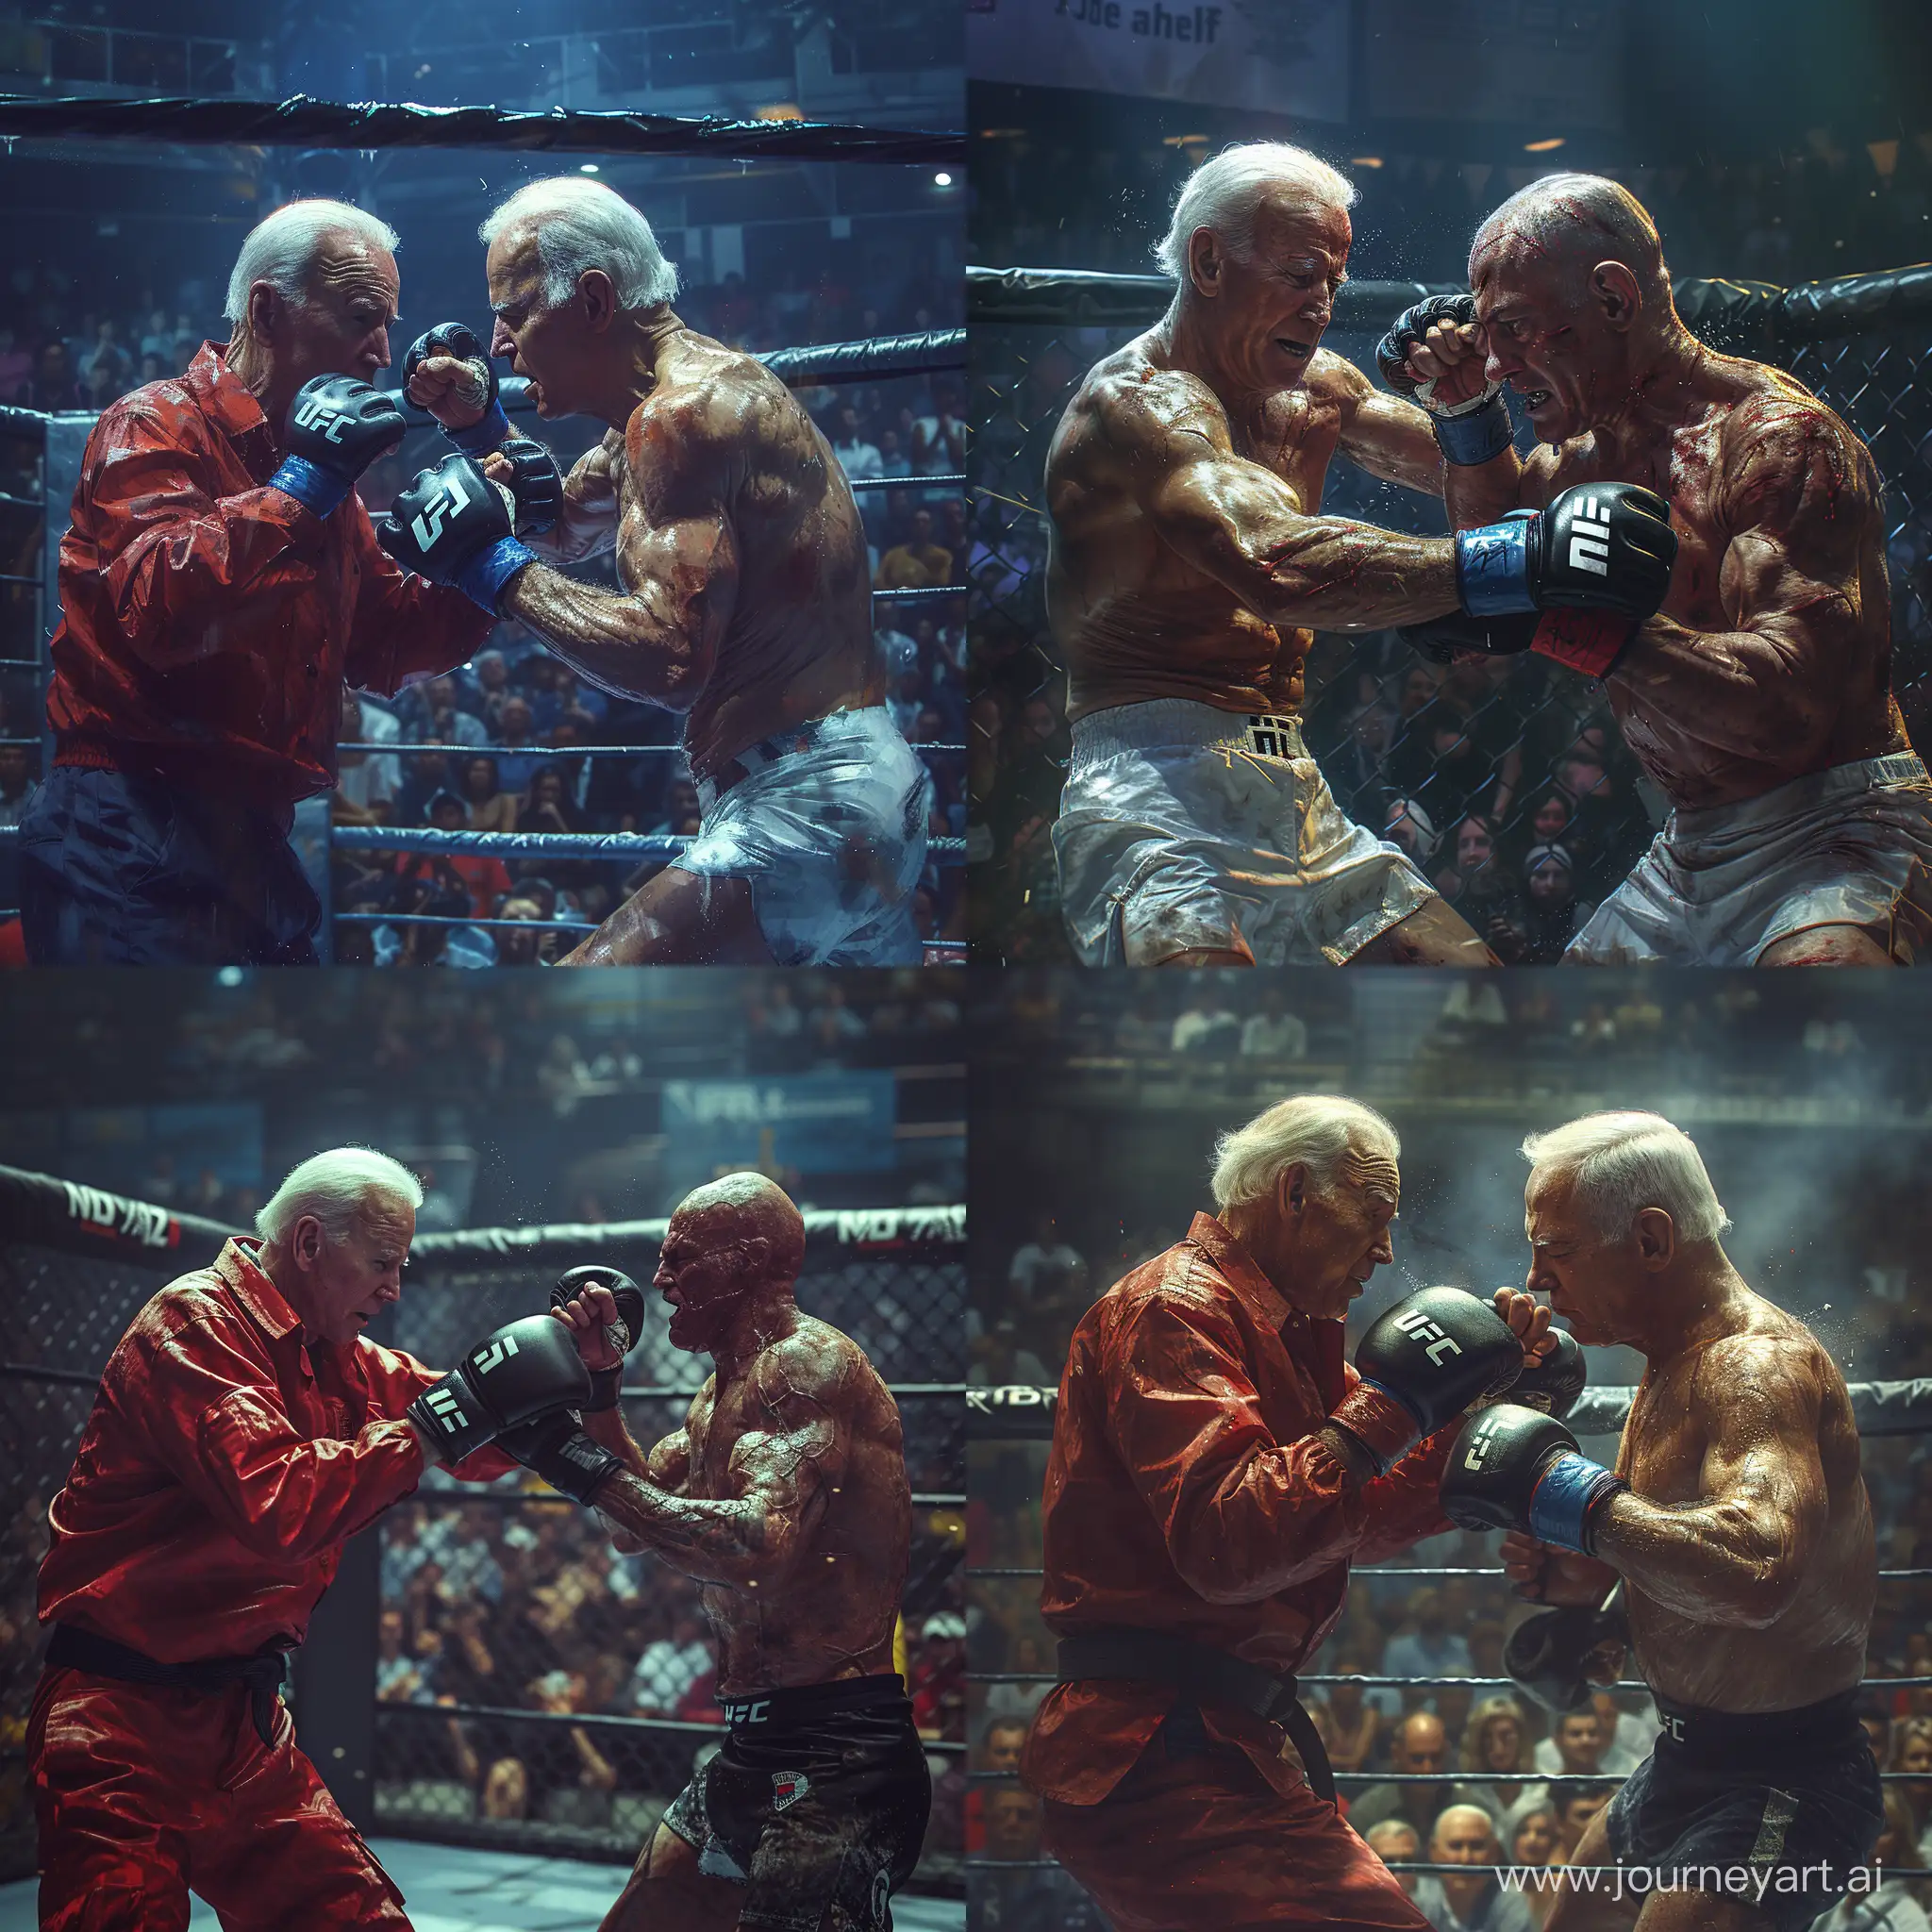 Political-Leaders-Biden-and-Netanyahu-Engage-in-Intense-MMA-Match